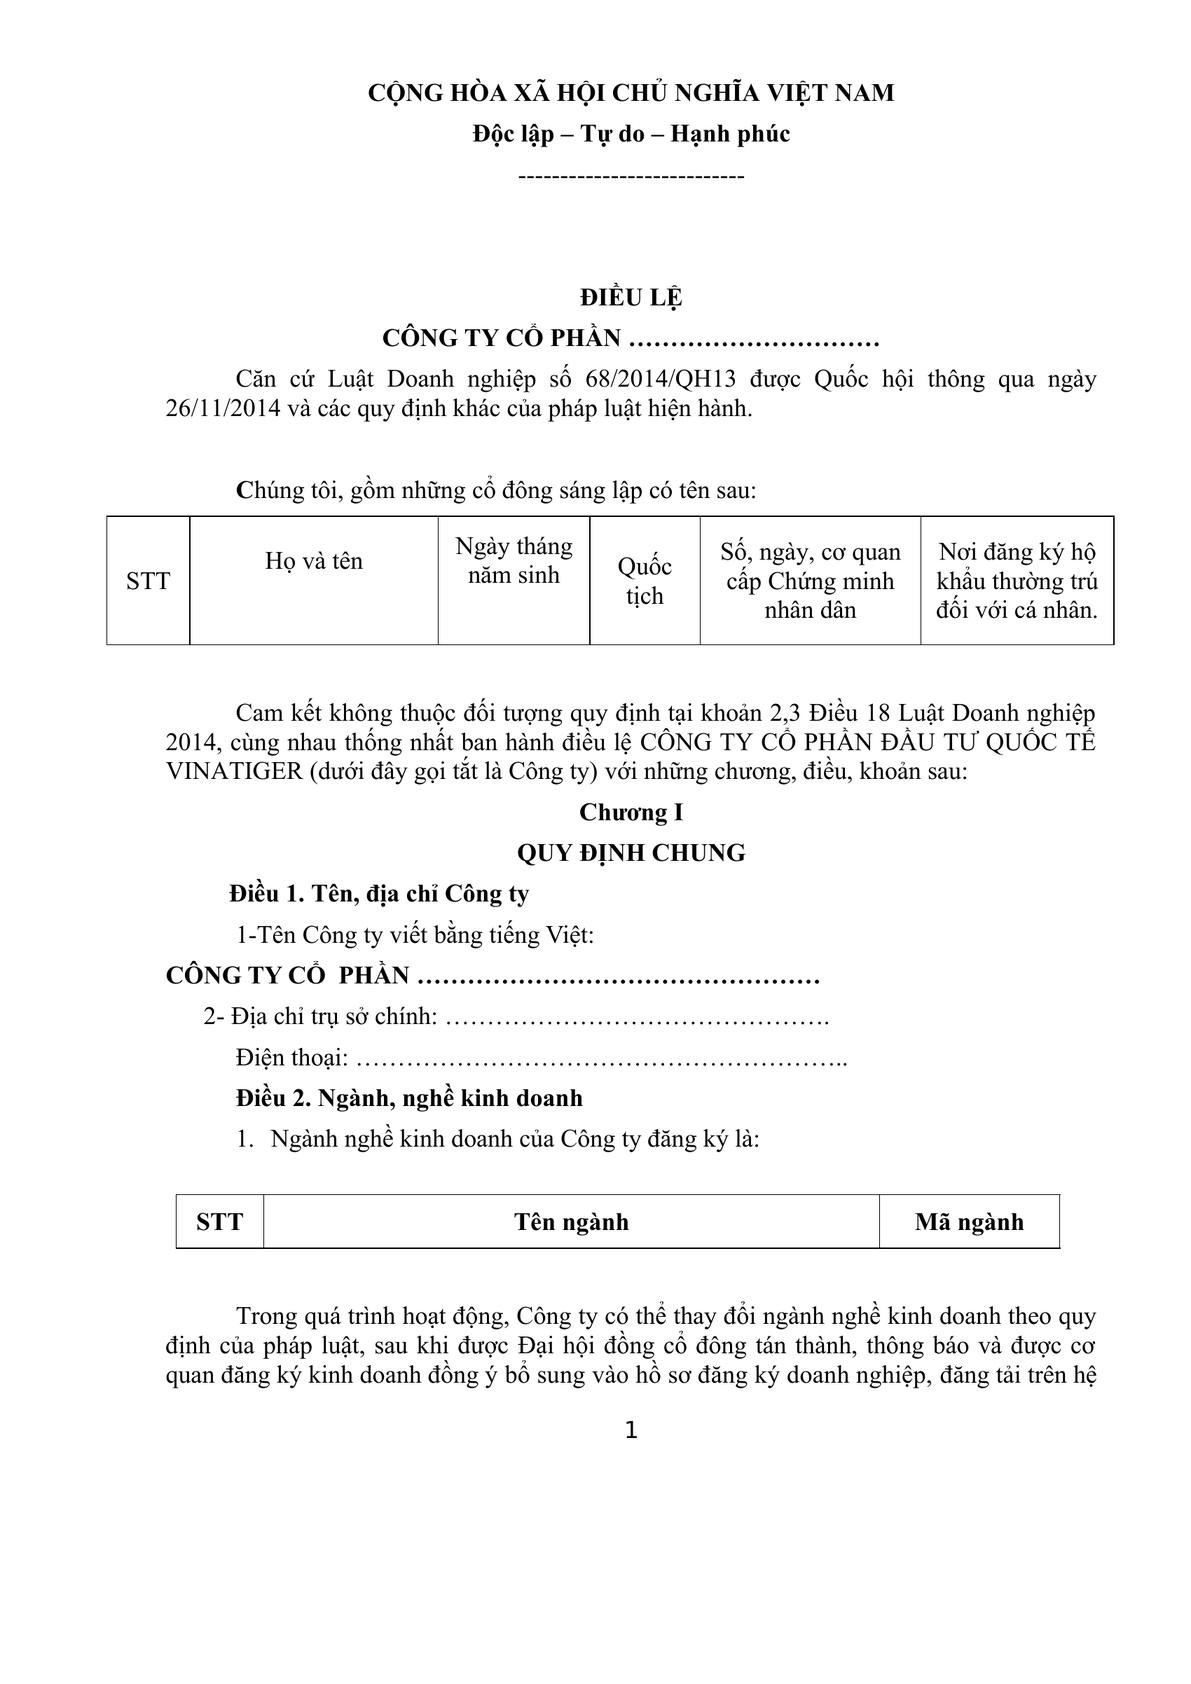 Charter Template for Joint Stock Company form in Vietnam-0